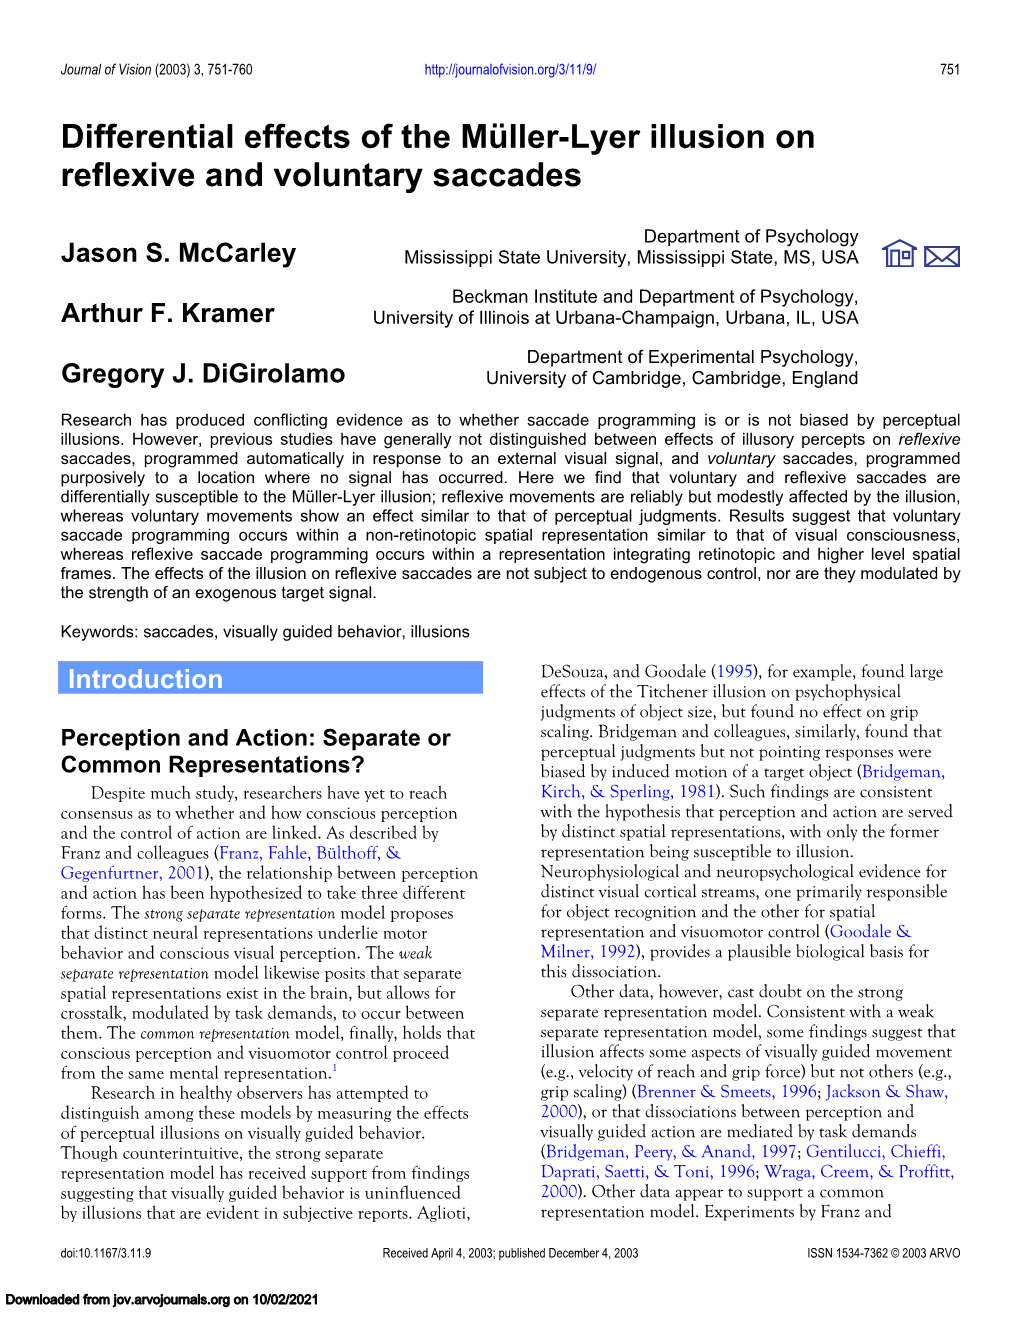 Differential Effects of the Müller-Lyer Illusion on Reflexive and Voluntary Saccades